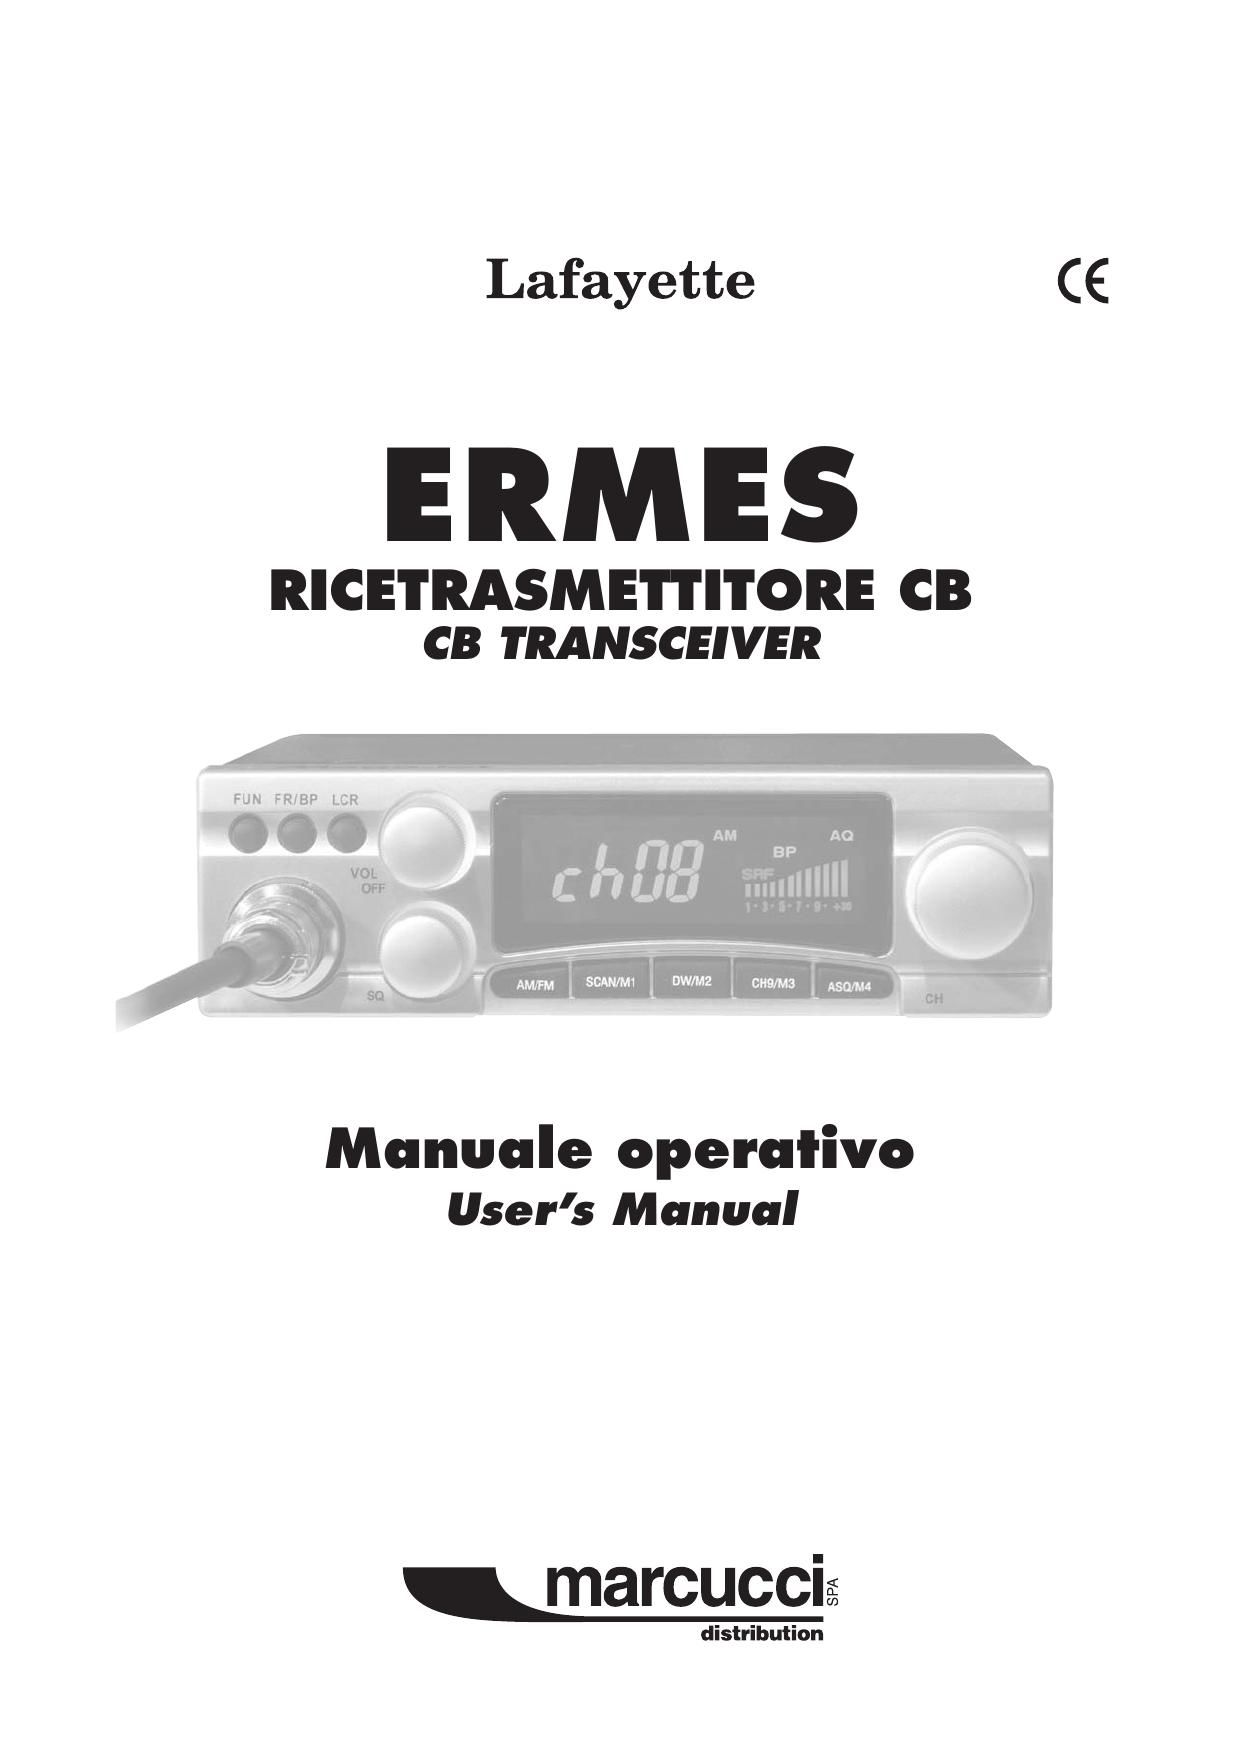 Lafayette Ermes Owners Manual